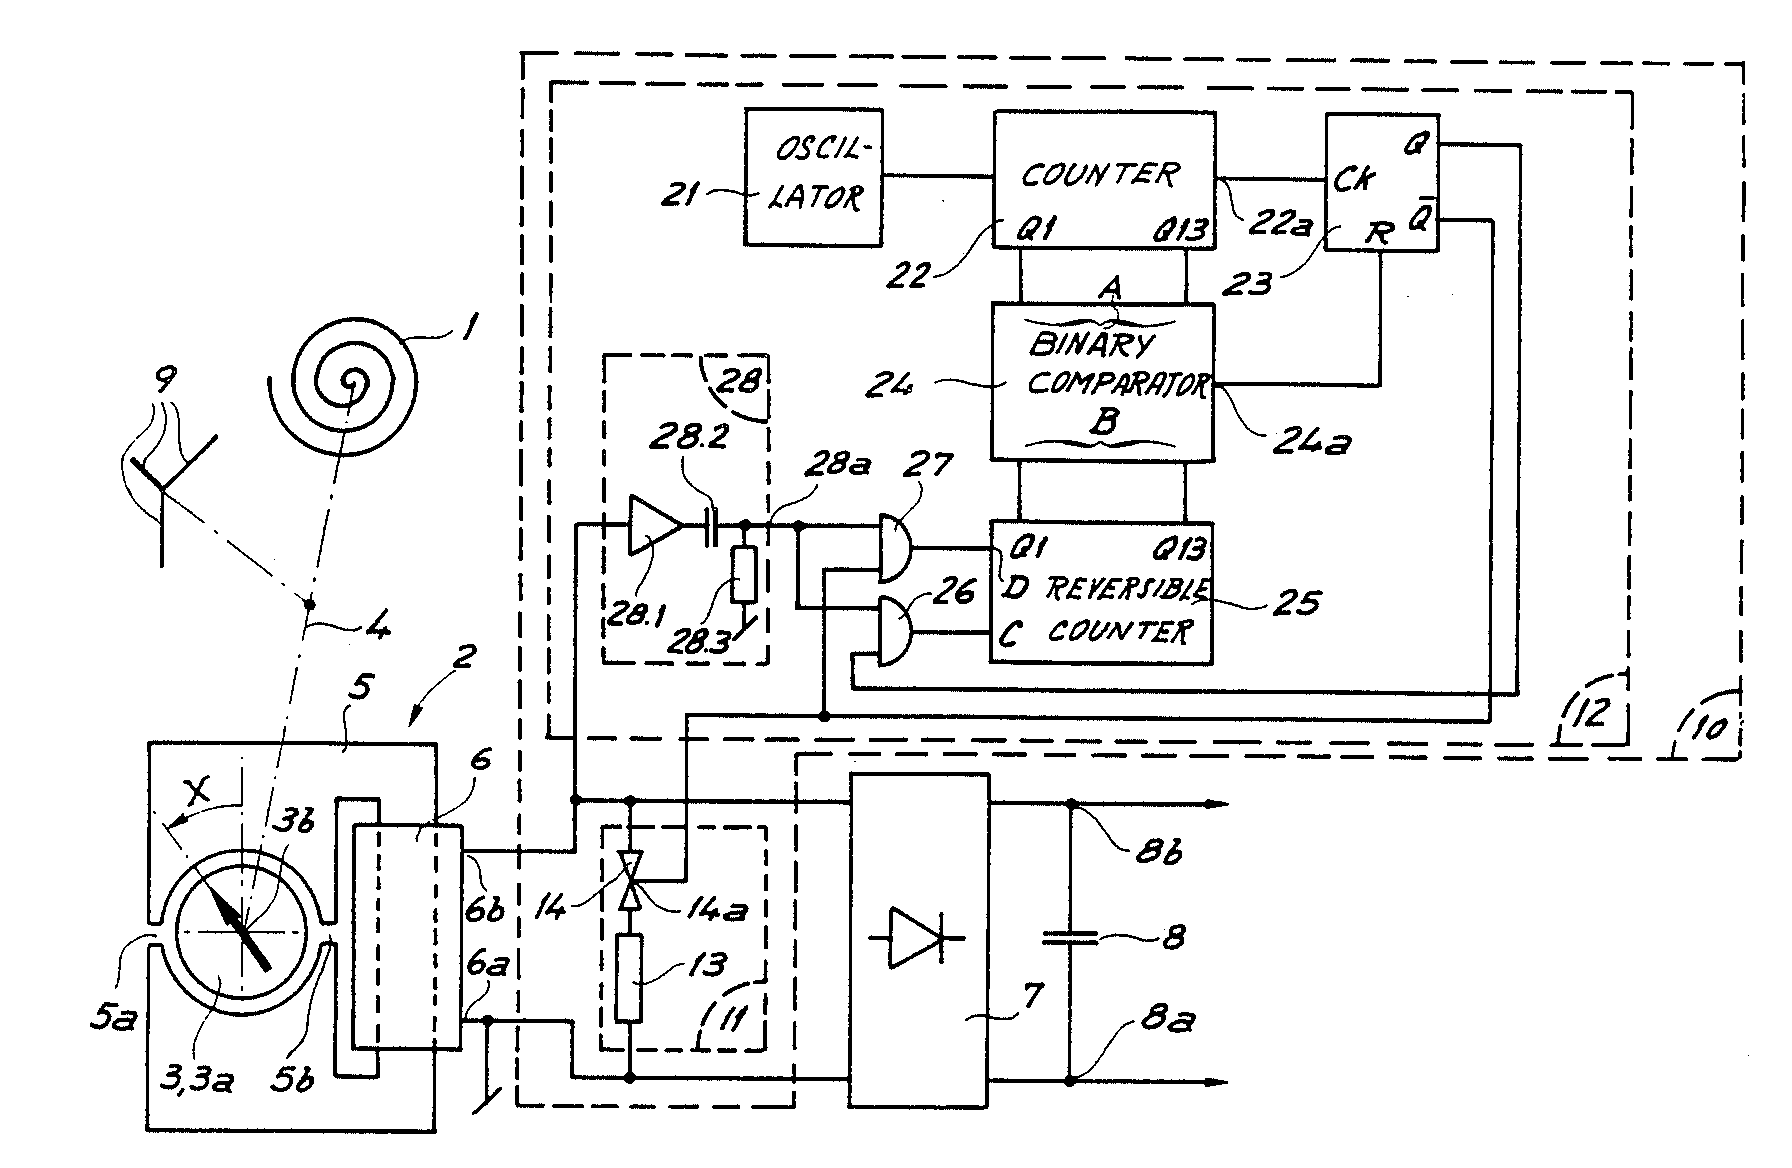 us4799003(a)_mechanical-to-electrical energy converter未知图片